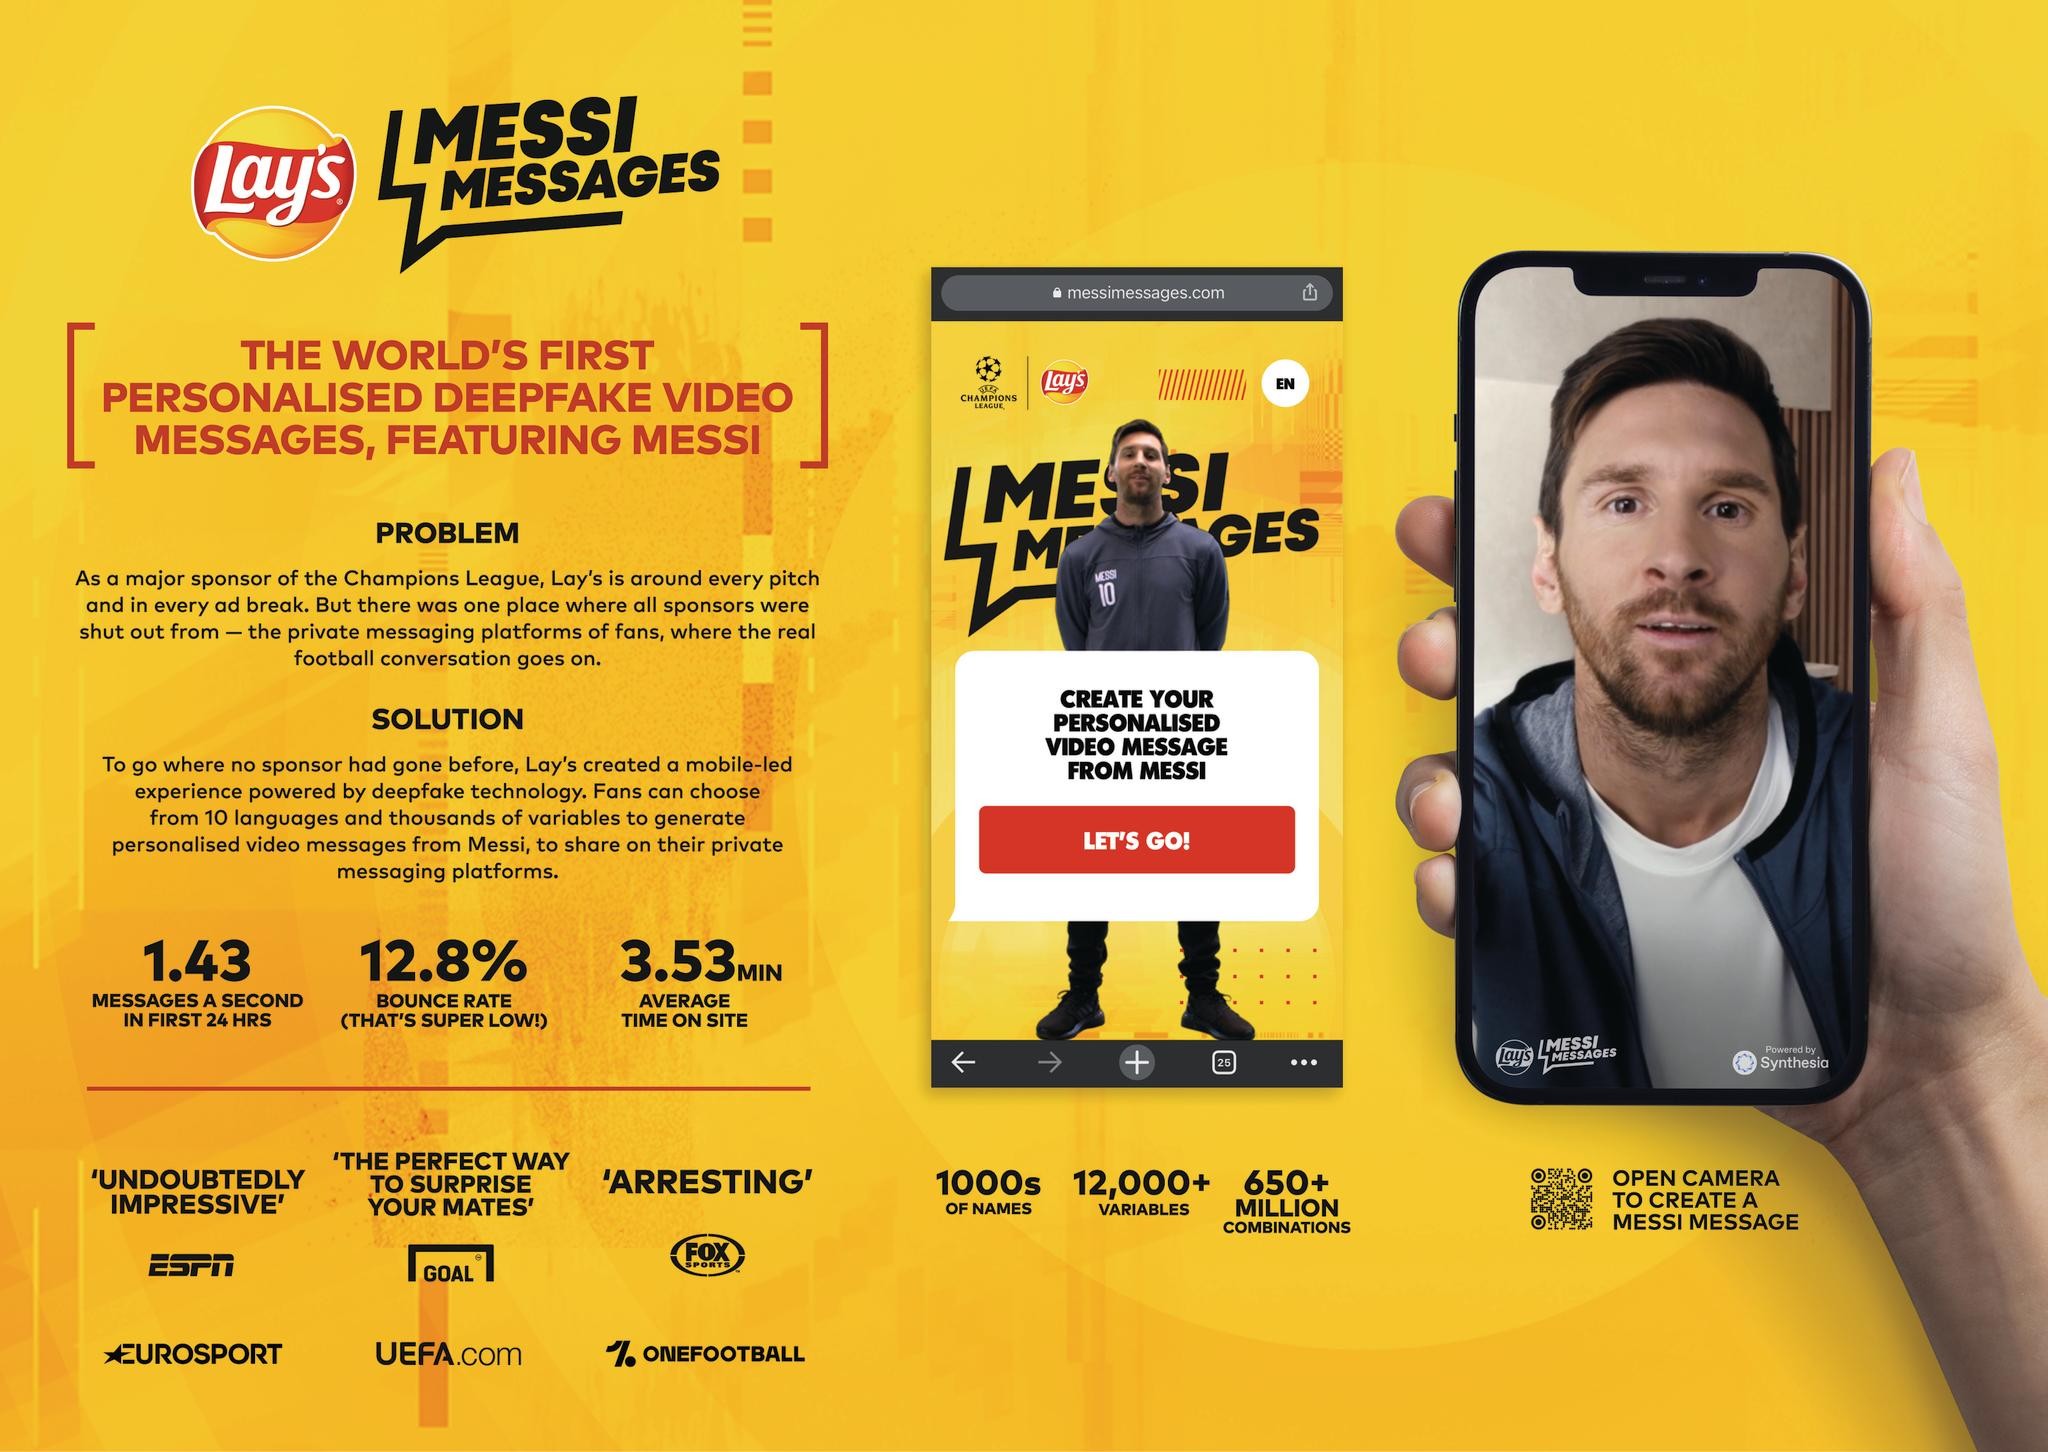 Messi Messages